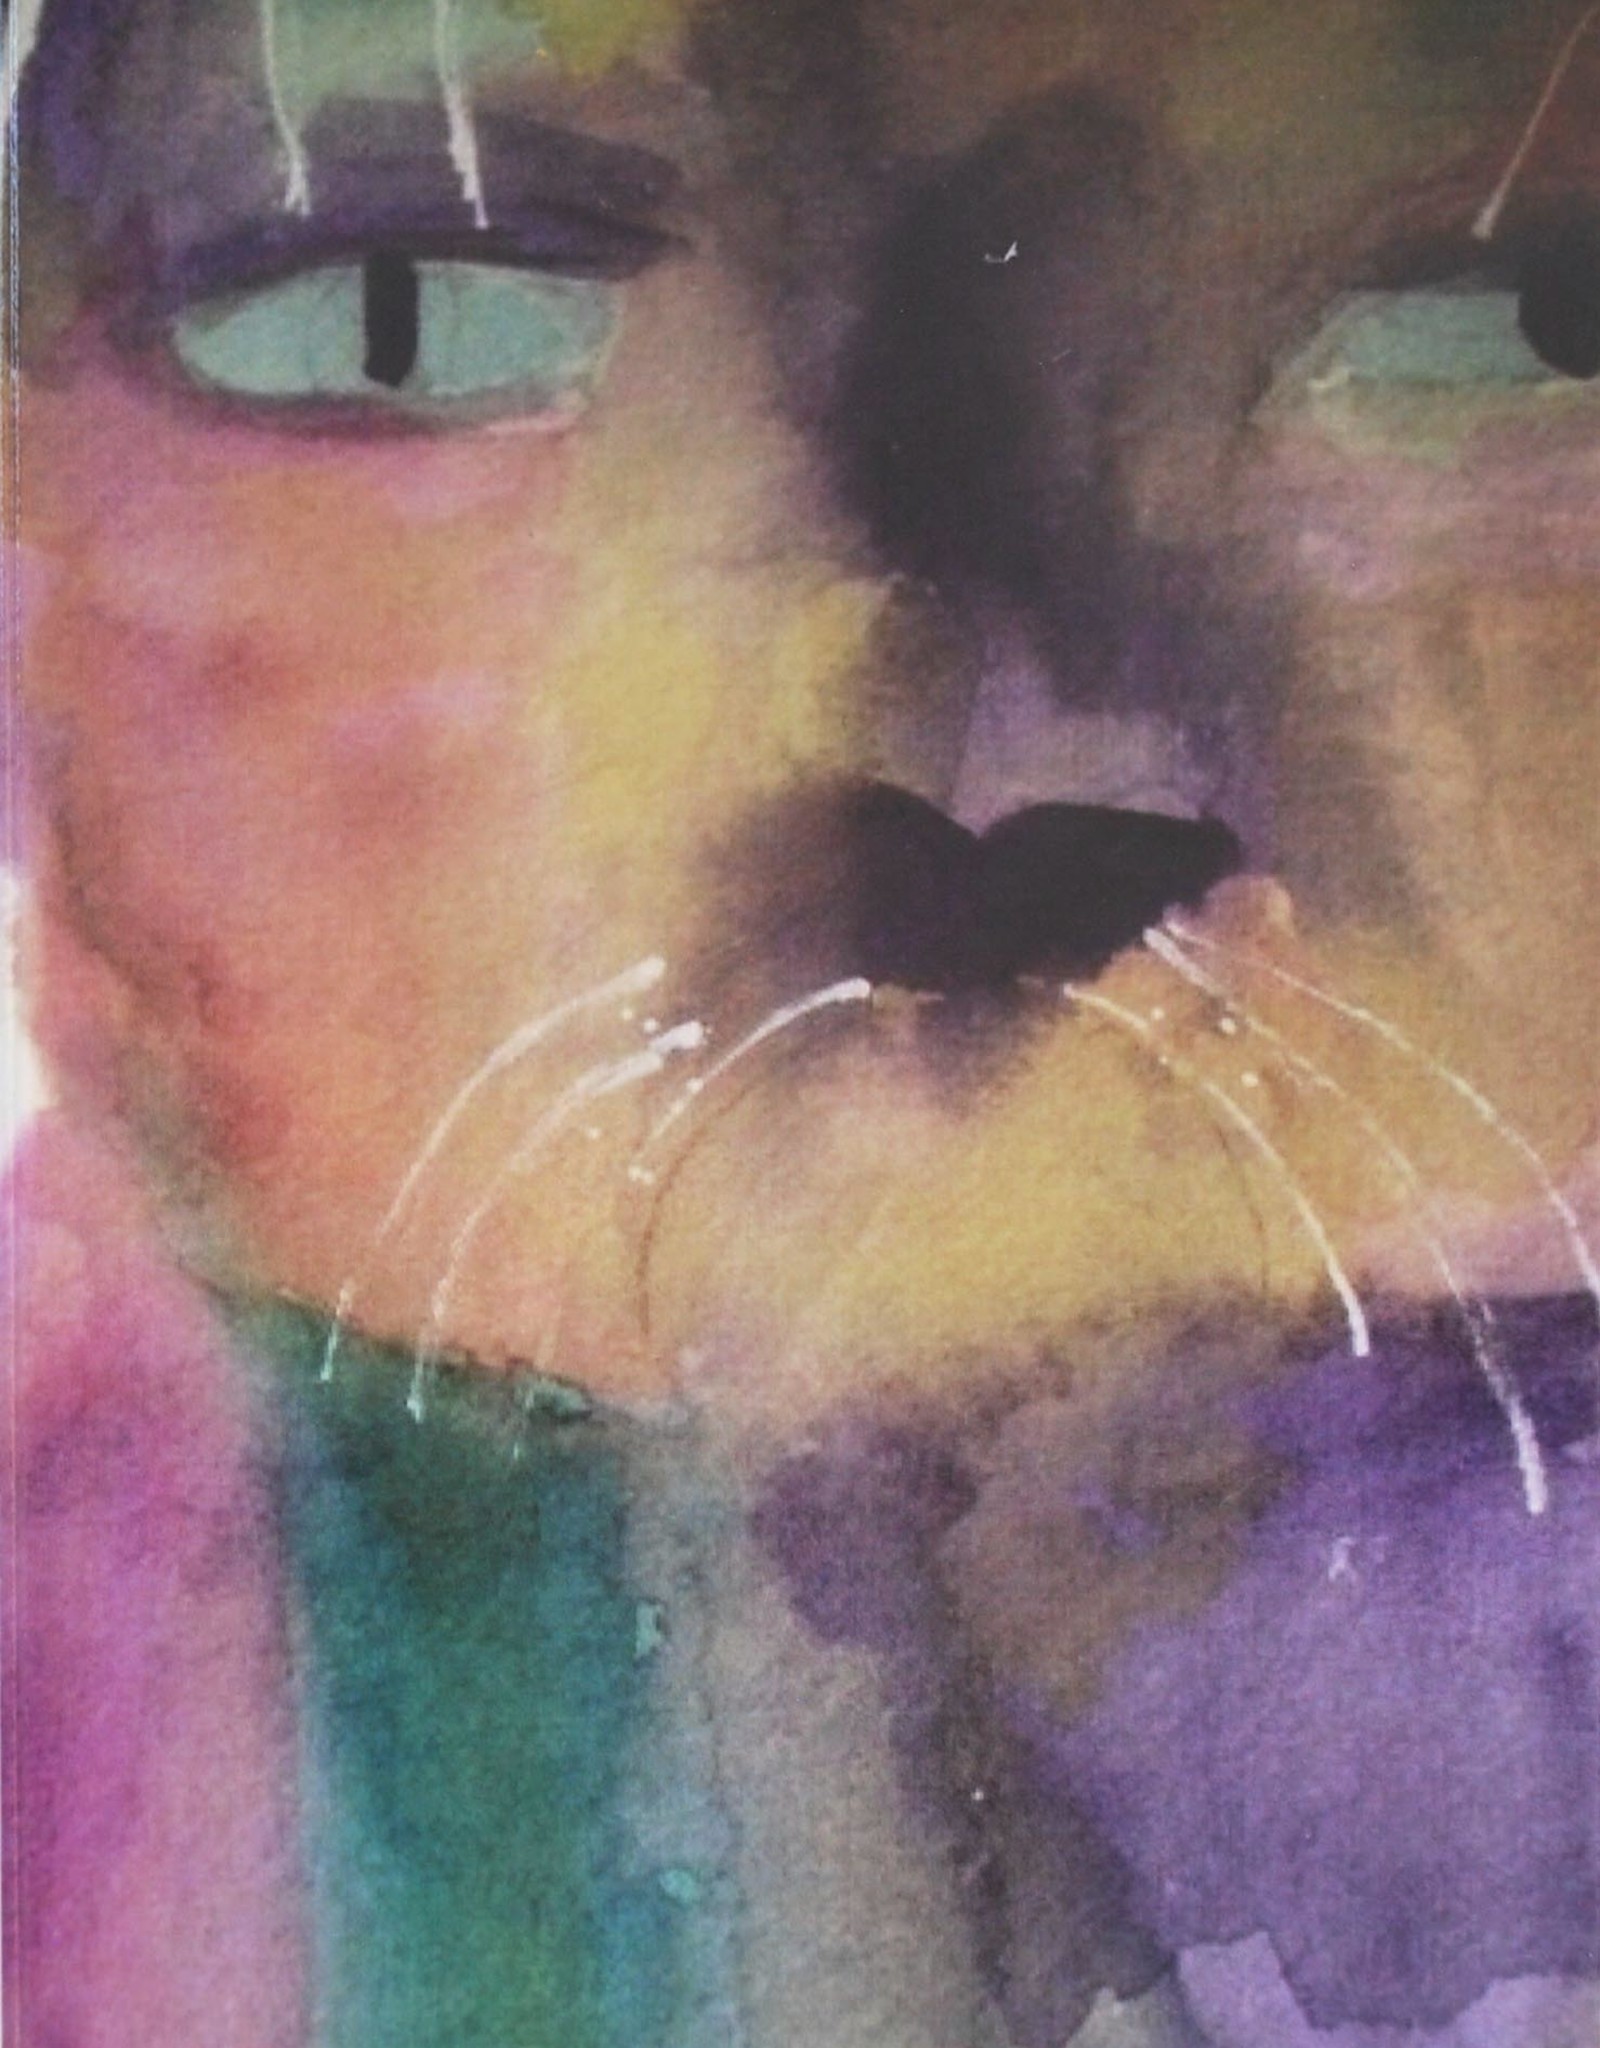 Cat Greeting Card 3, Michele Williams